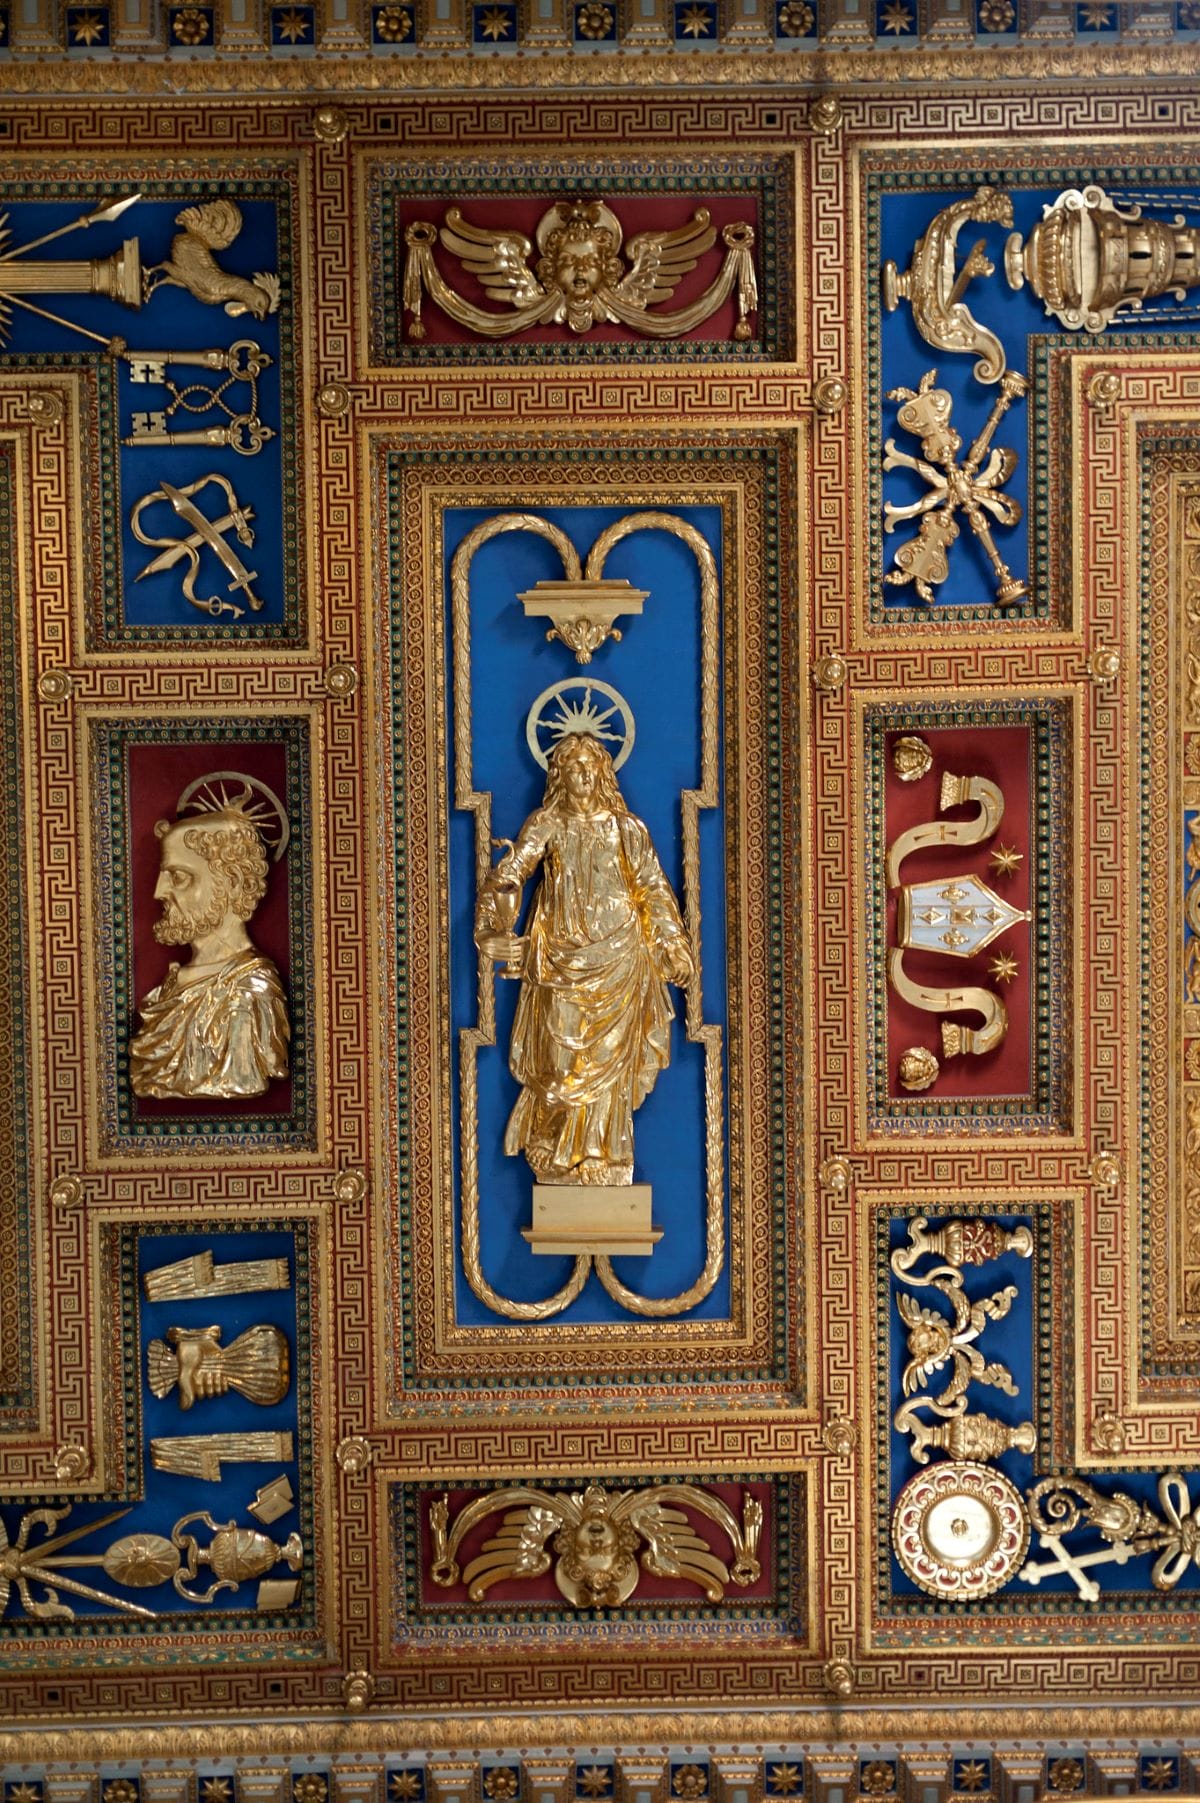 decorated ceiling of San Giovanni in Laterano